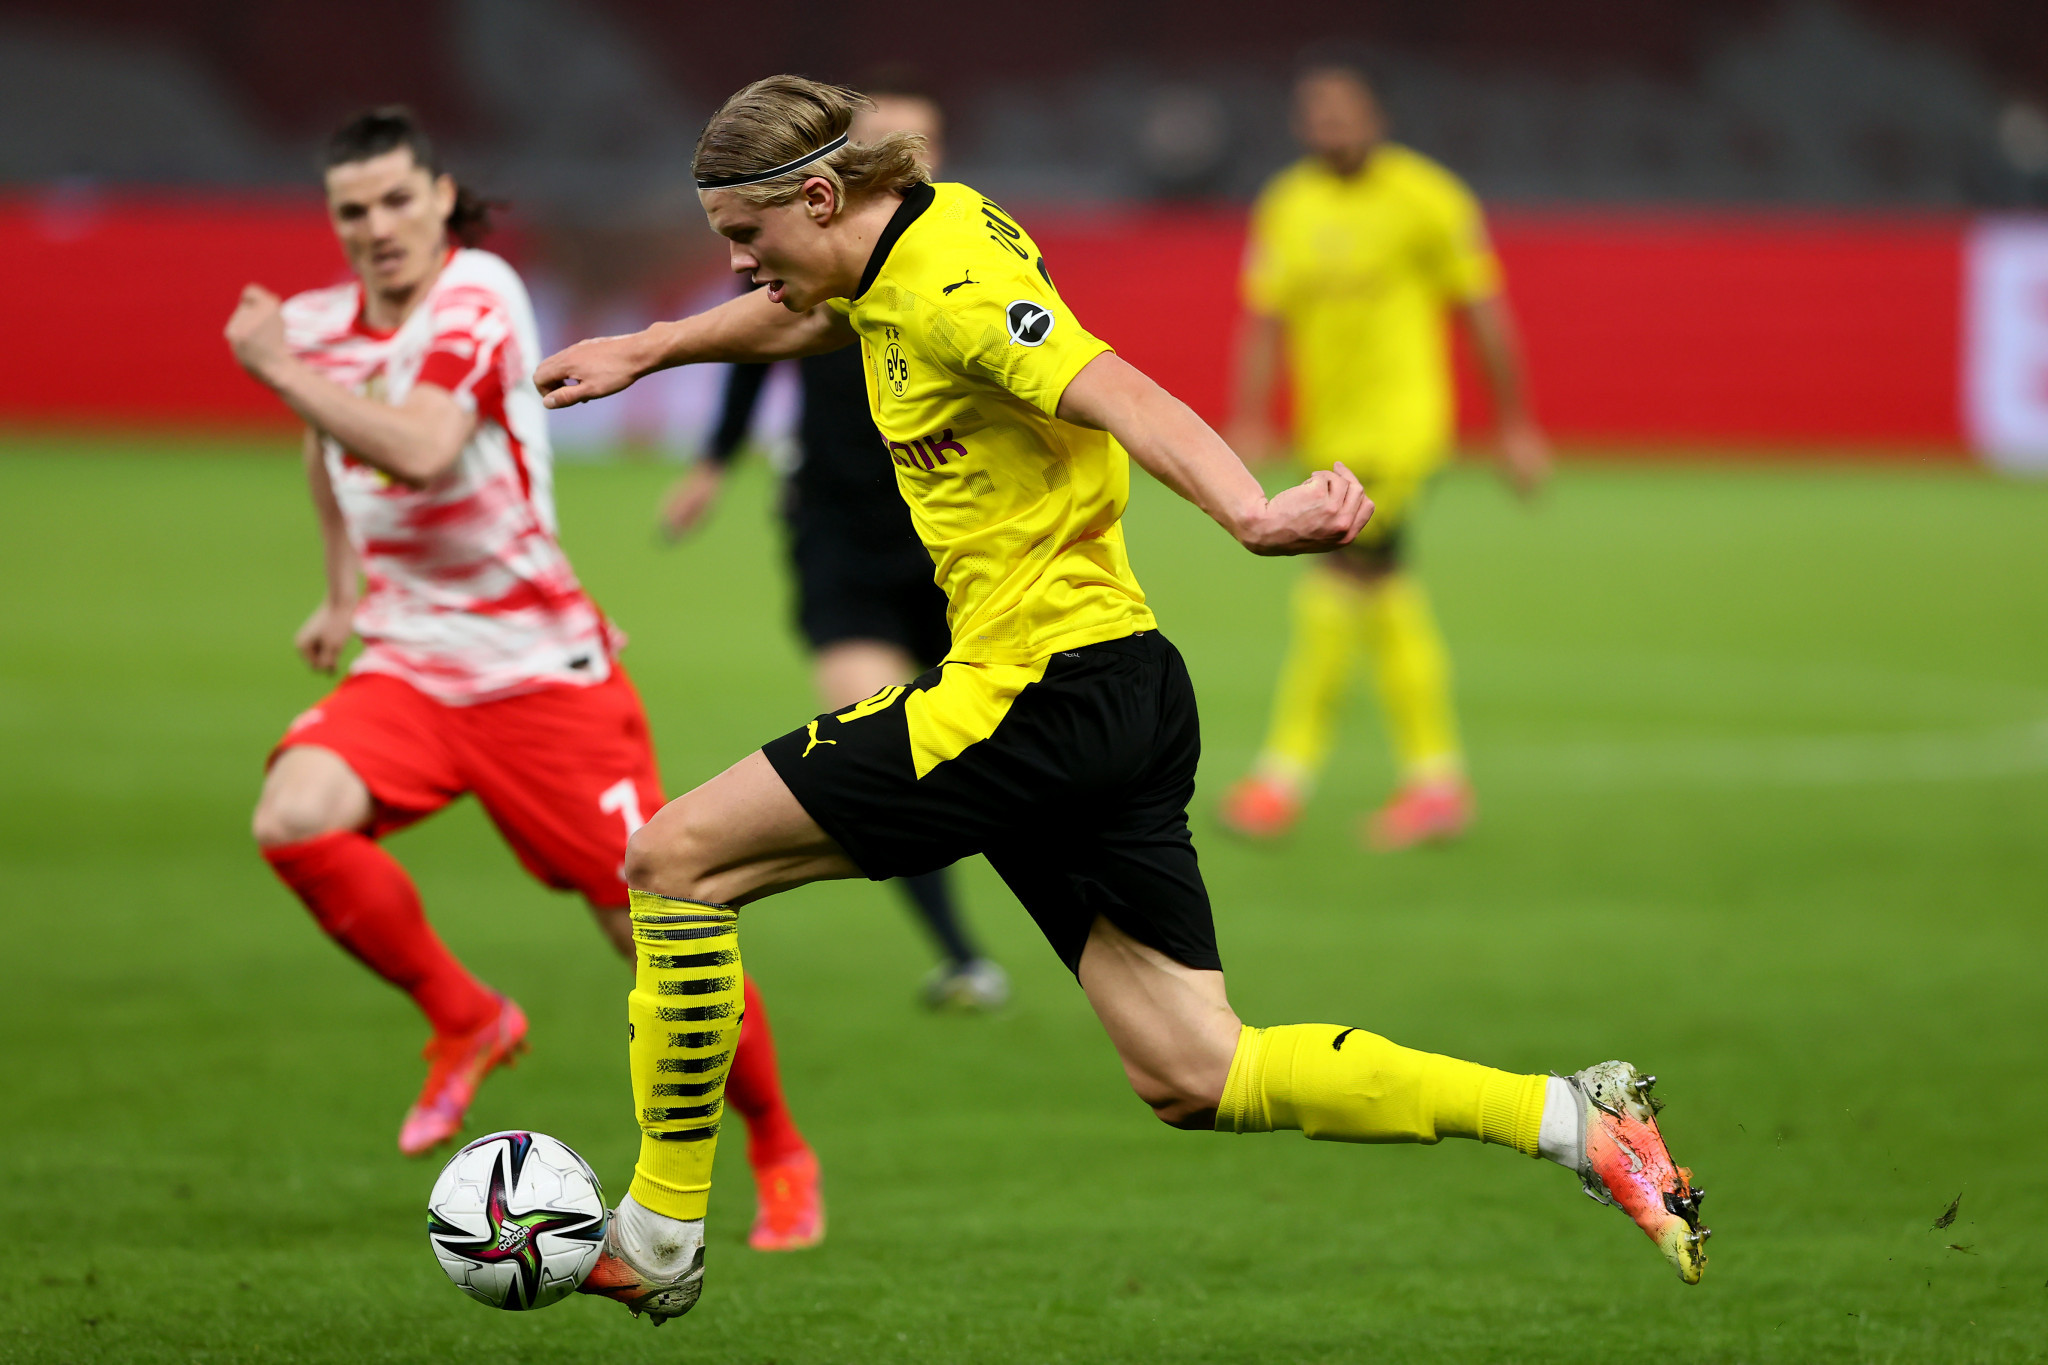 Borussia Dortmund defeated RB Leipzig 4-1 at the DFB-Pokal ©Getty Images